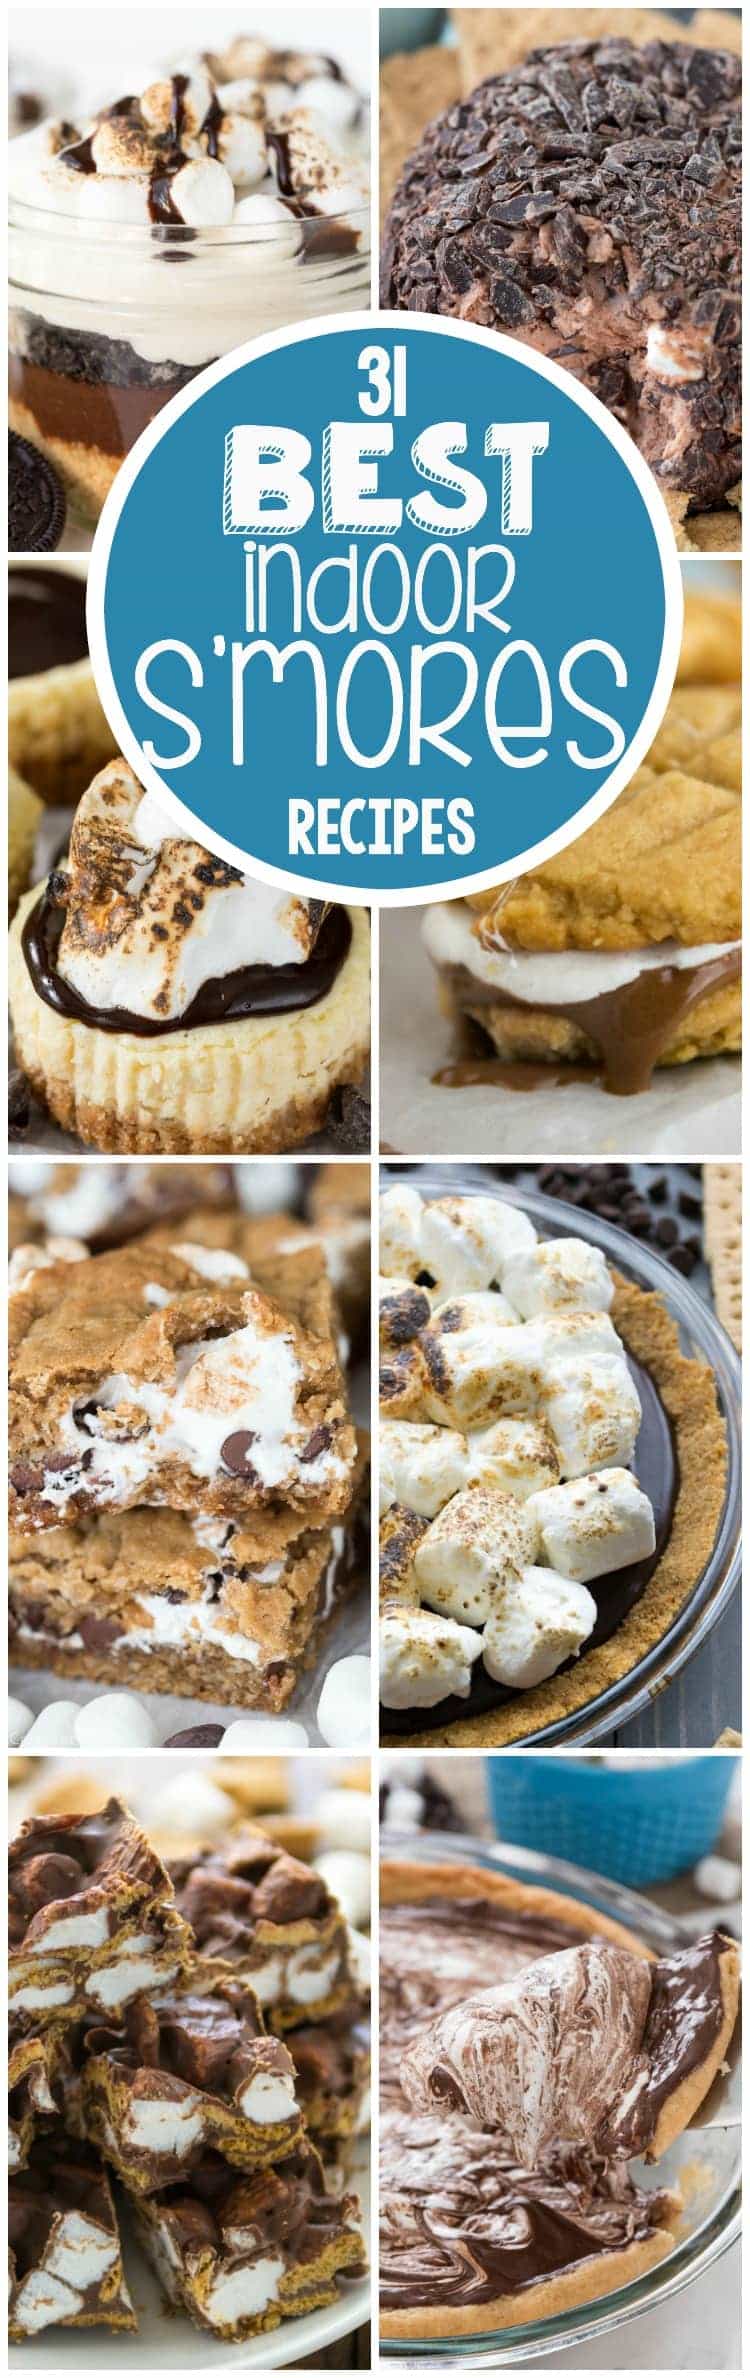 The 31 BEST Indoor S'more Recipes - s'mores all year round! From pie to cookies to dips and ice cream, these are the BEST ways to eat indoor s'mores!